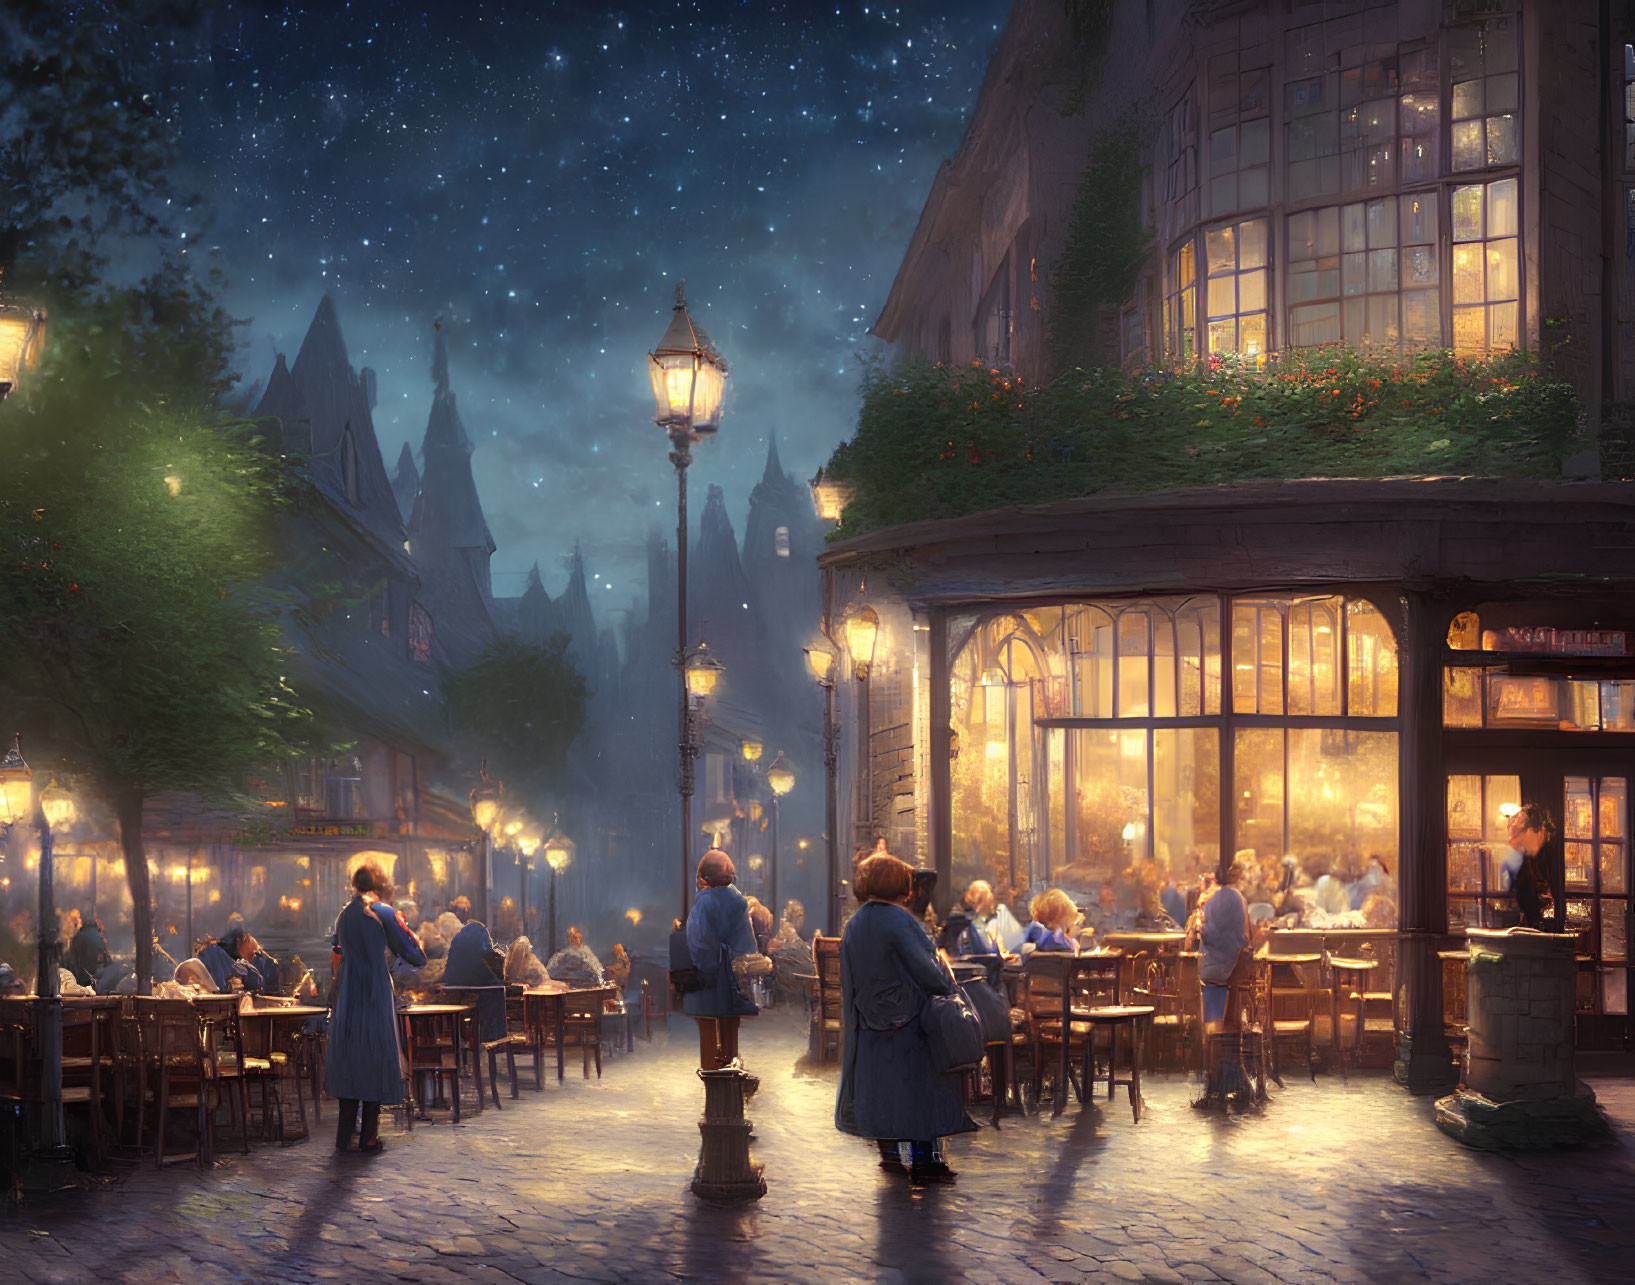 A Busy Nighttime Cafe